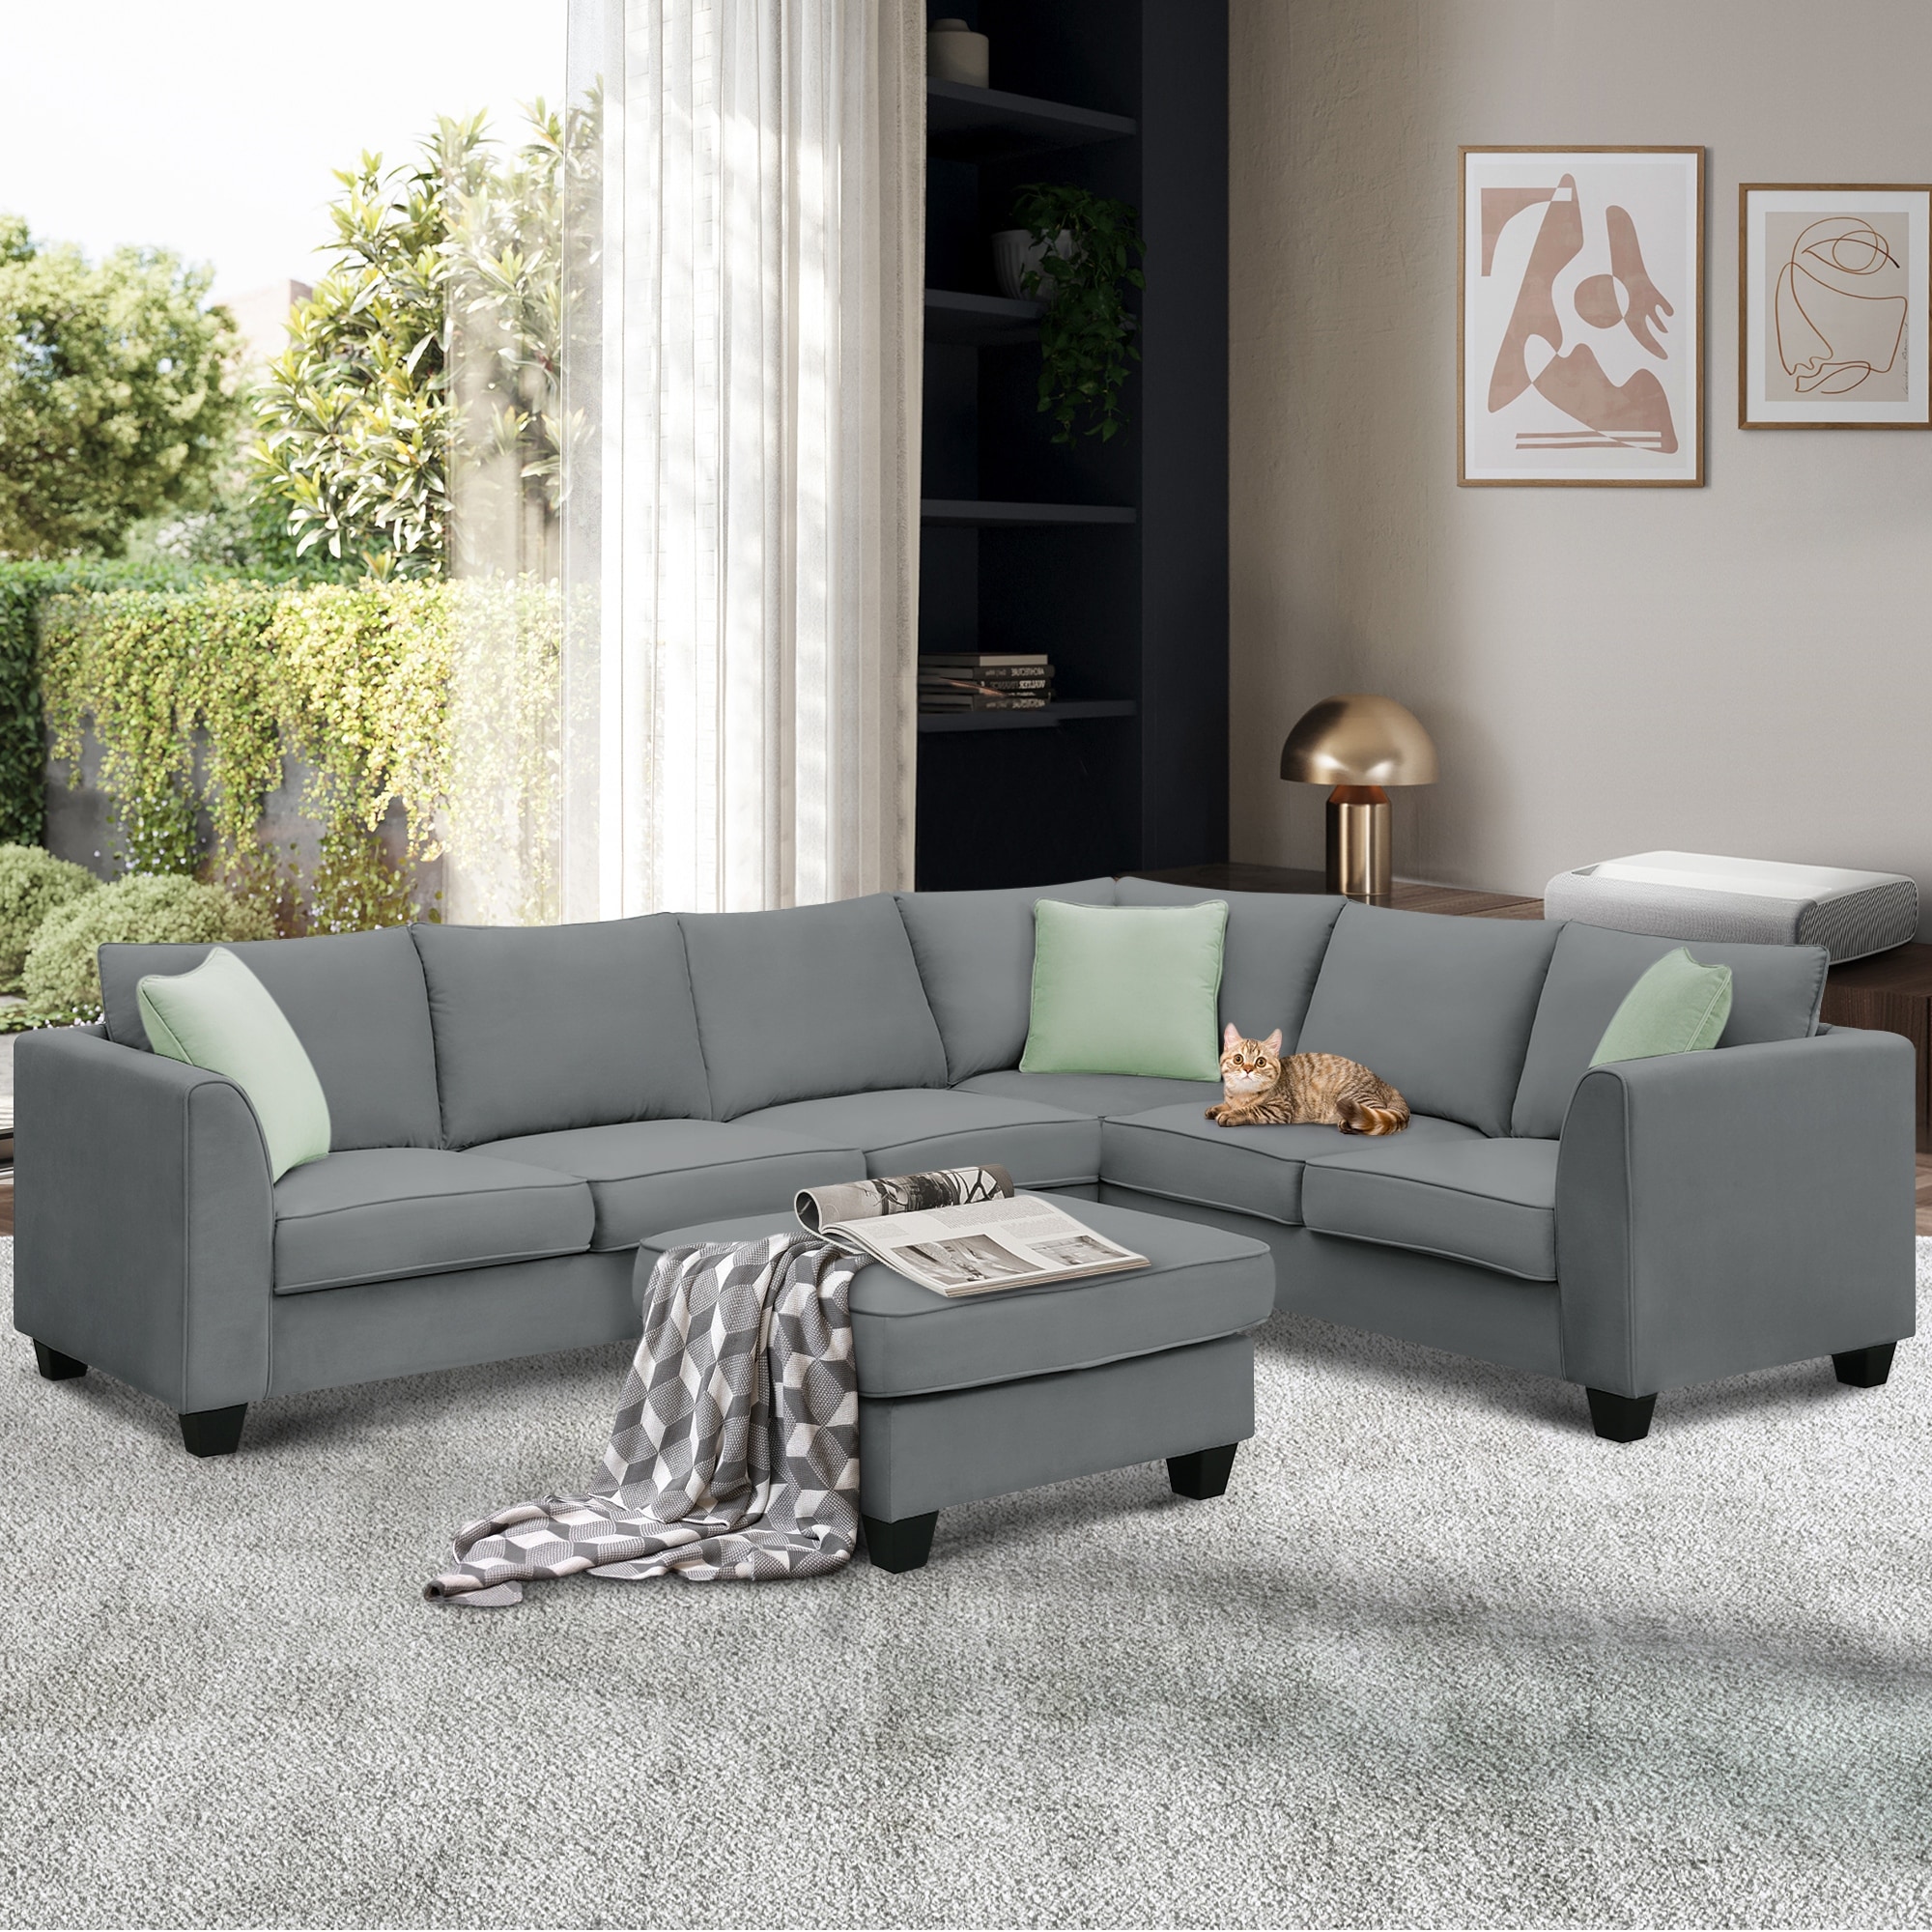 DFS green corner sofa, armchair and footrest with storage in Newport Isle  of Wight - Sold